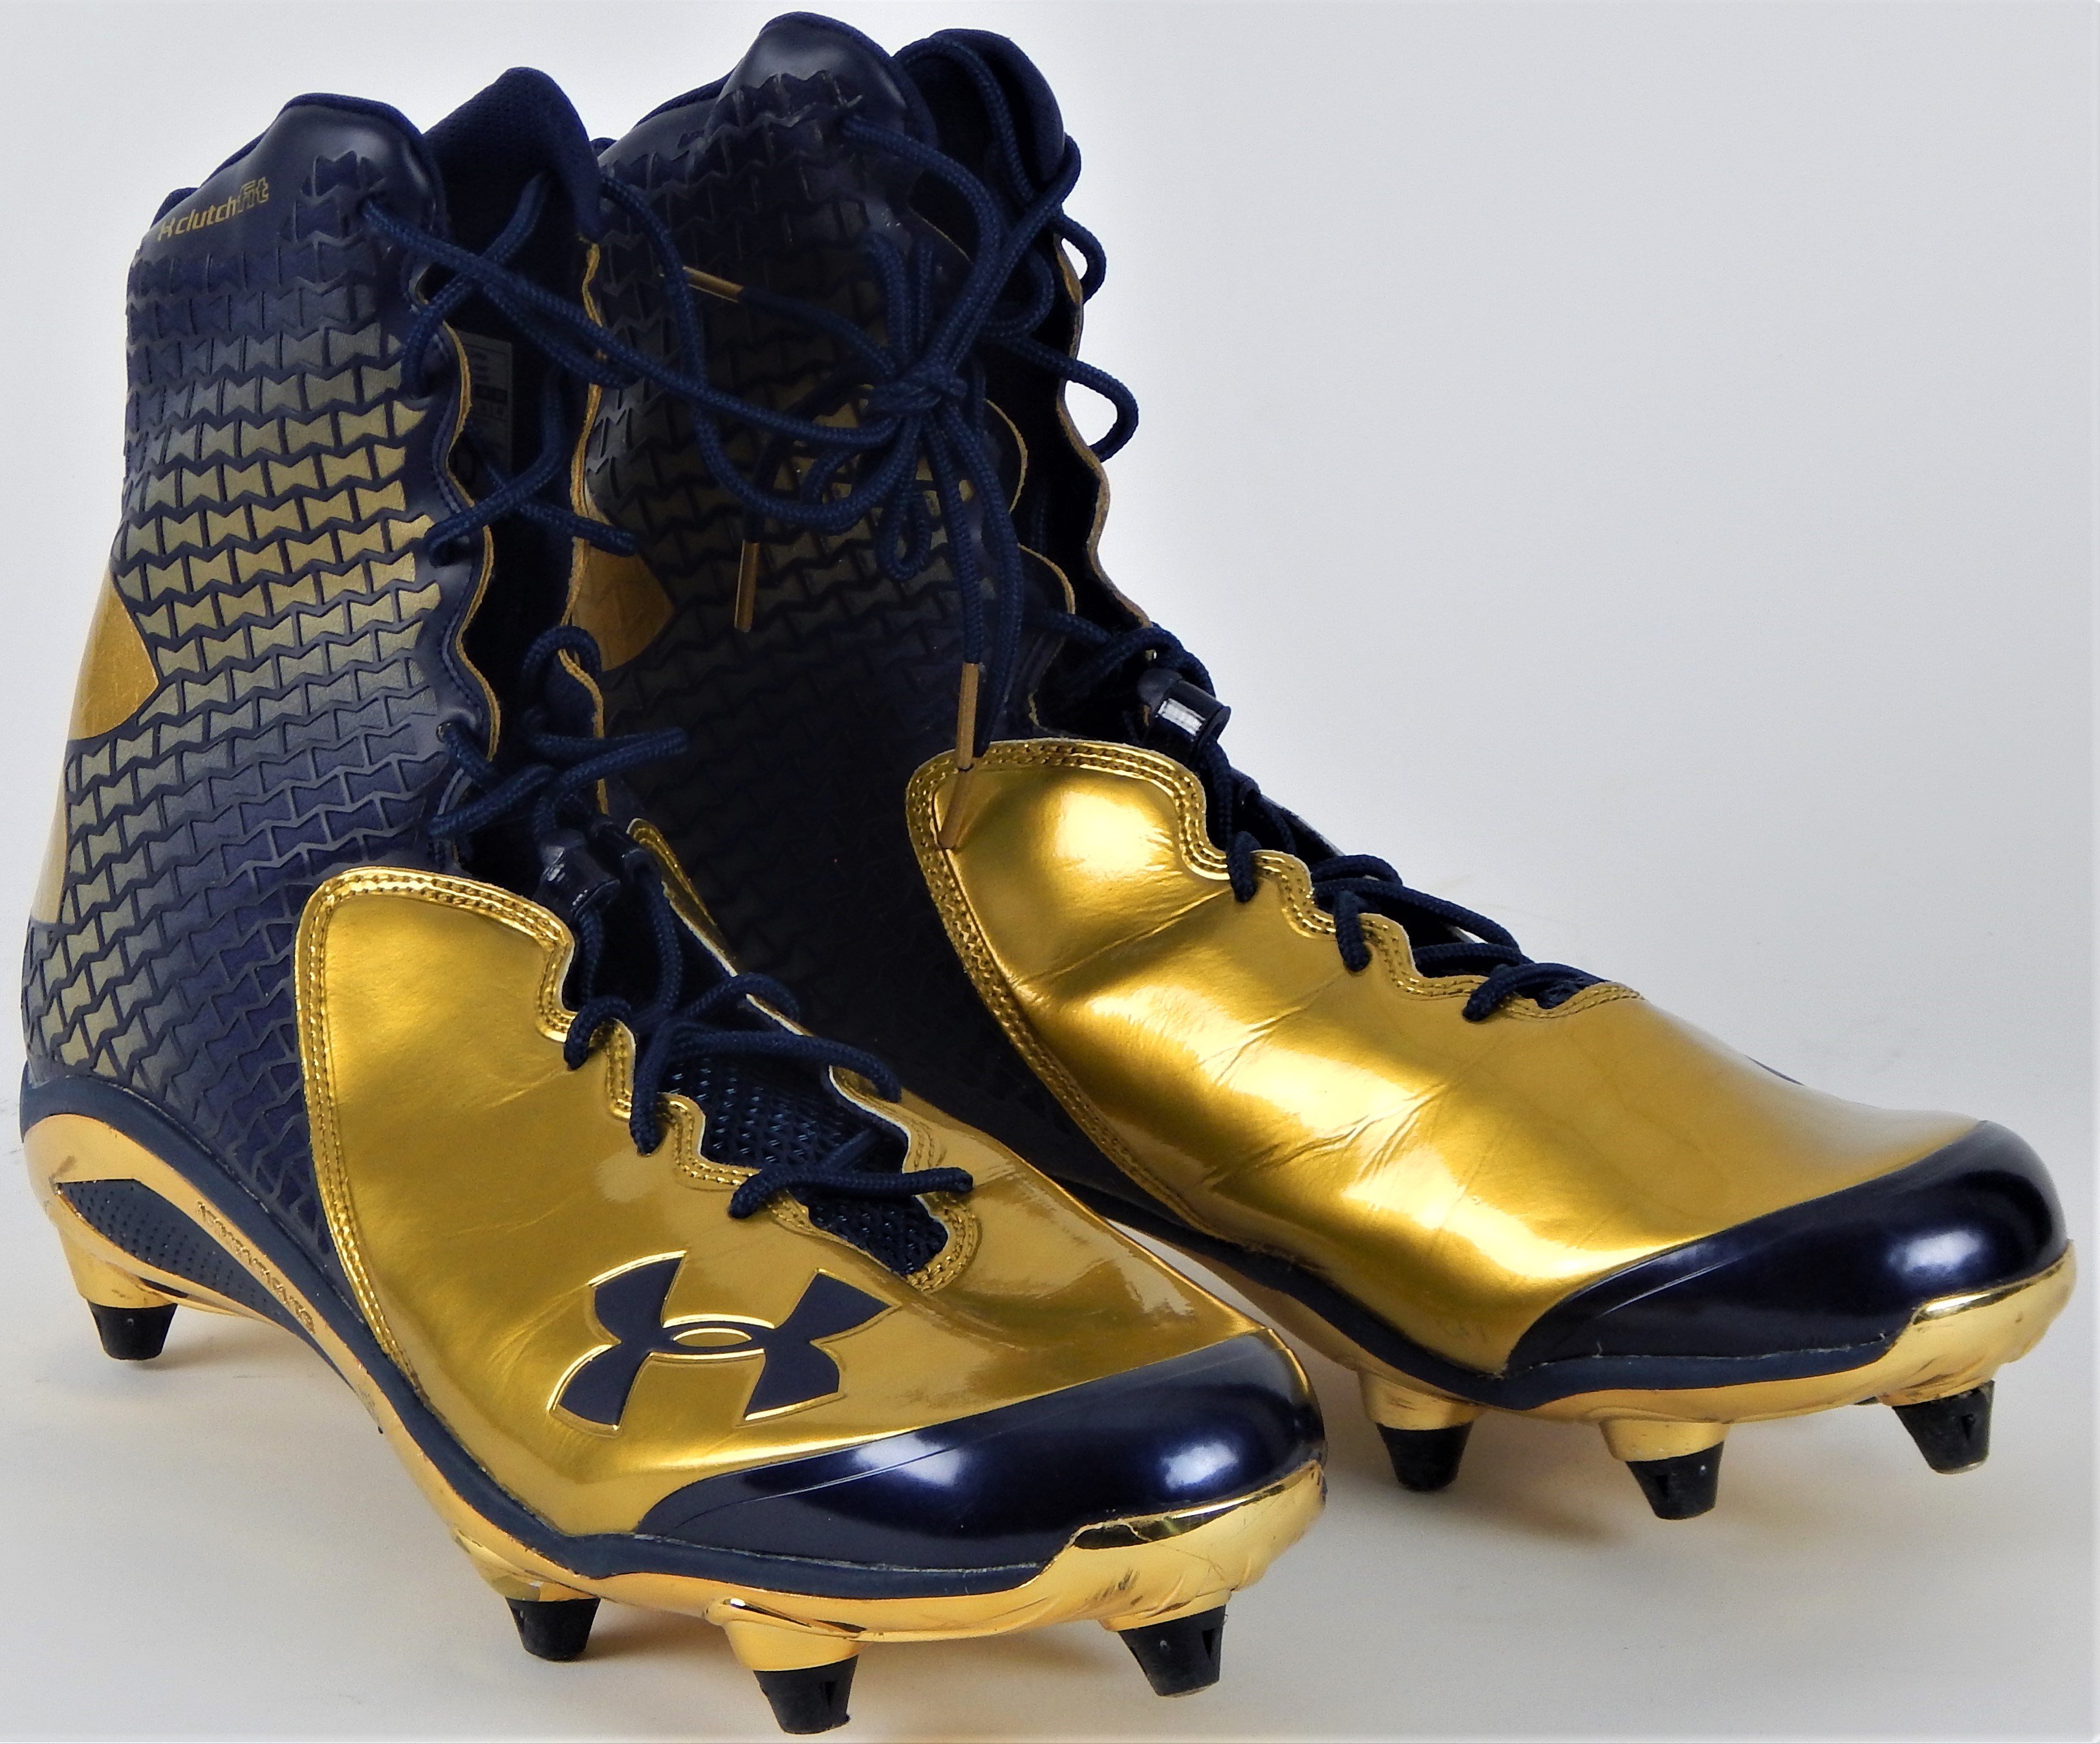 Game Used Jonathan Bonner Notre Dame Cleats